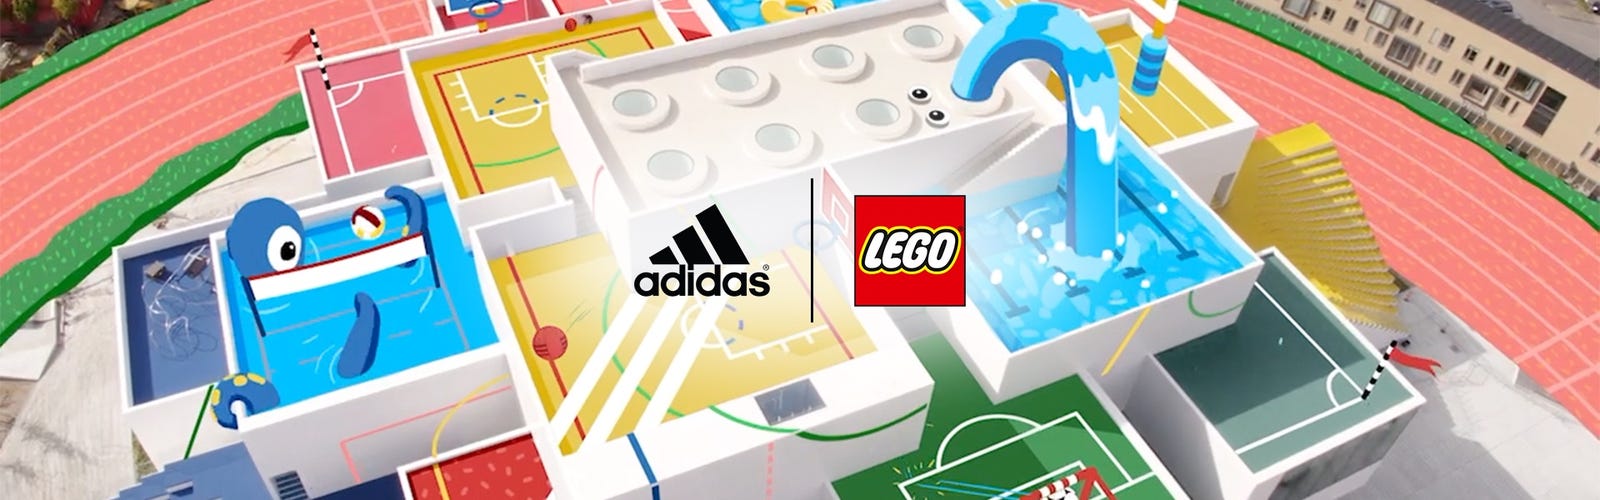 Lego Group And Adidas Official Lego Shop Us